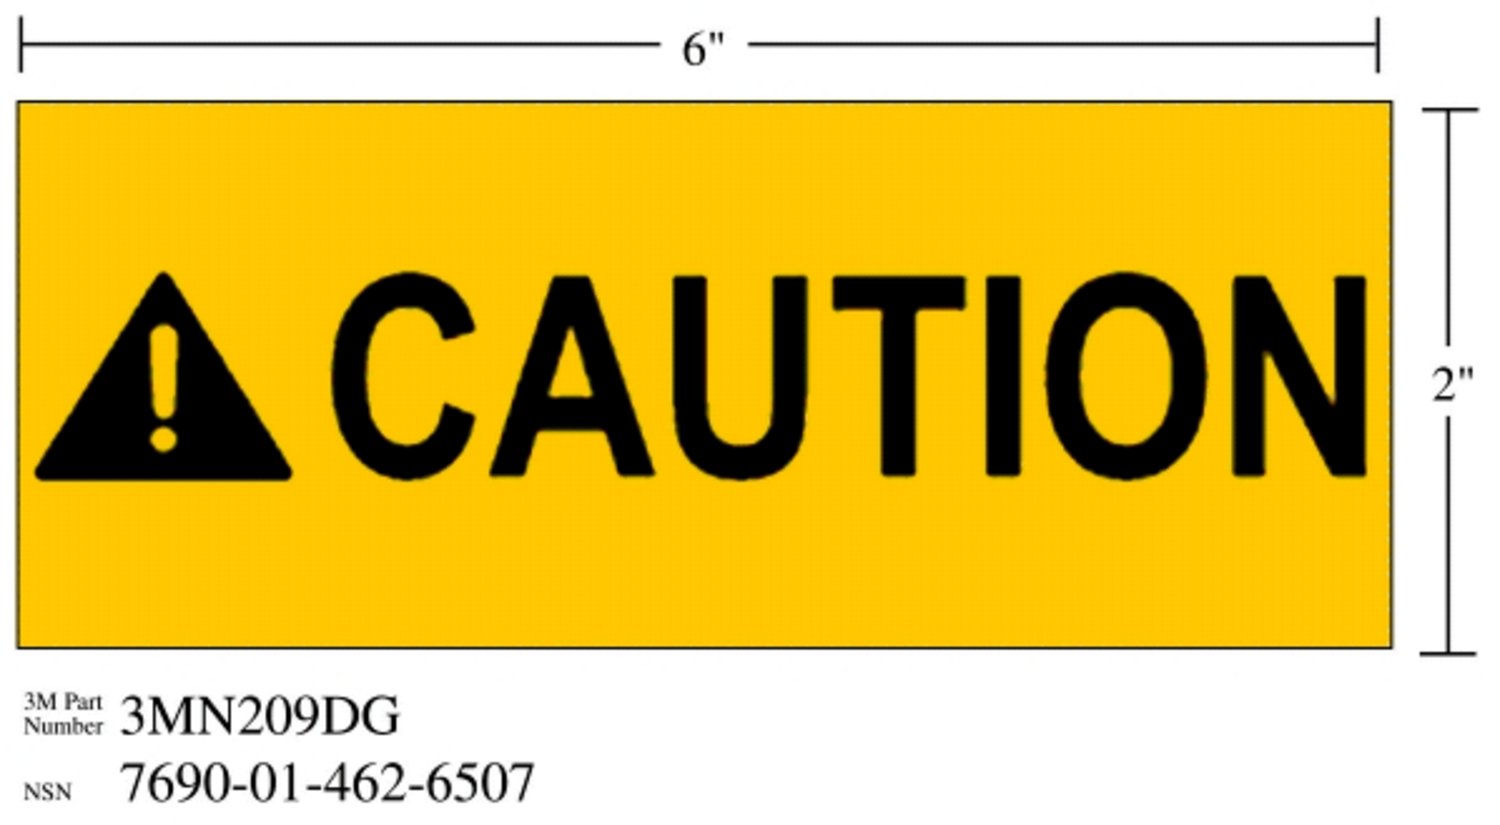 7010343550 - 3M Diamond Grade Safety Sign 3MN209DG, "CAUTION", 6 in x 2 in,
10/Package